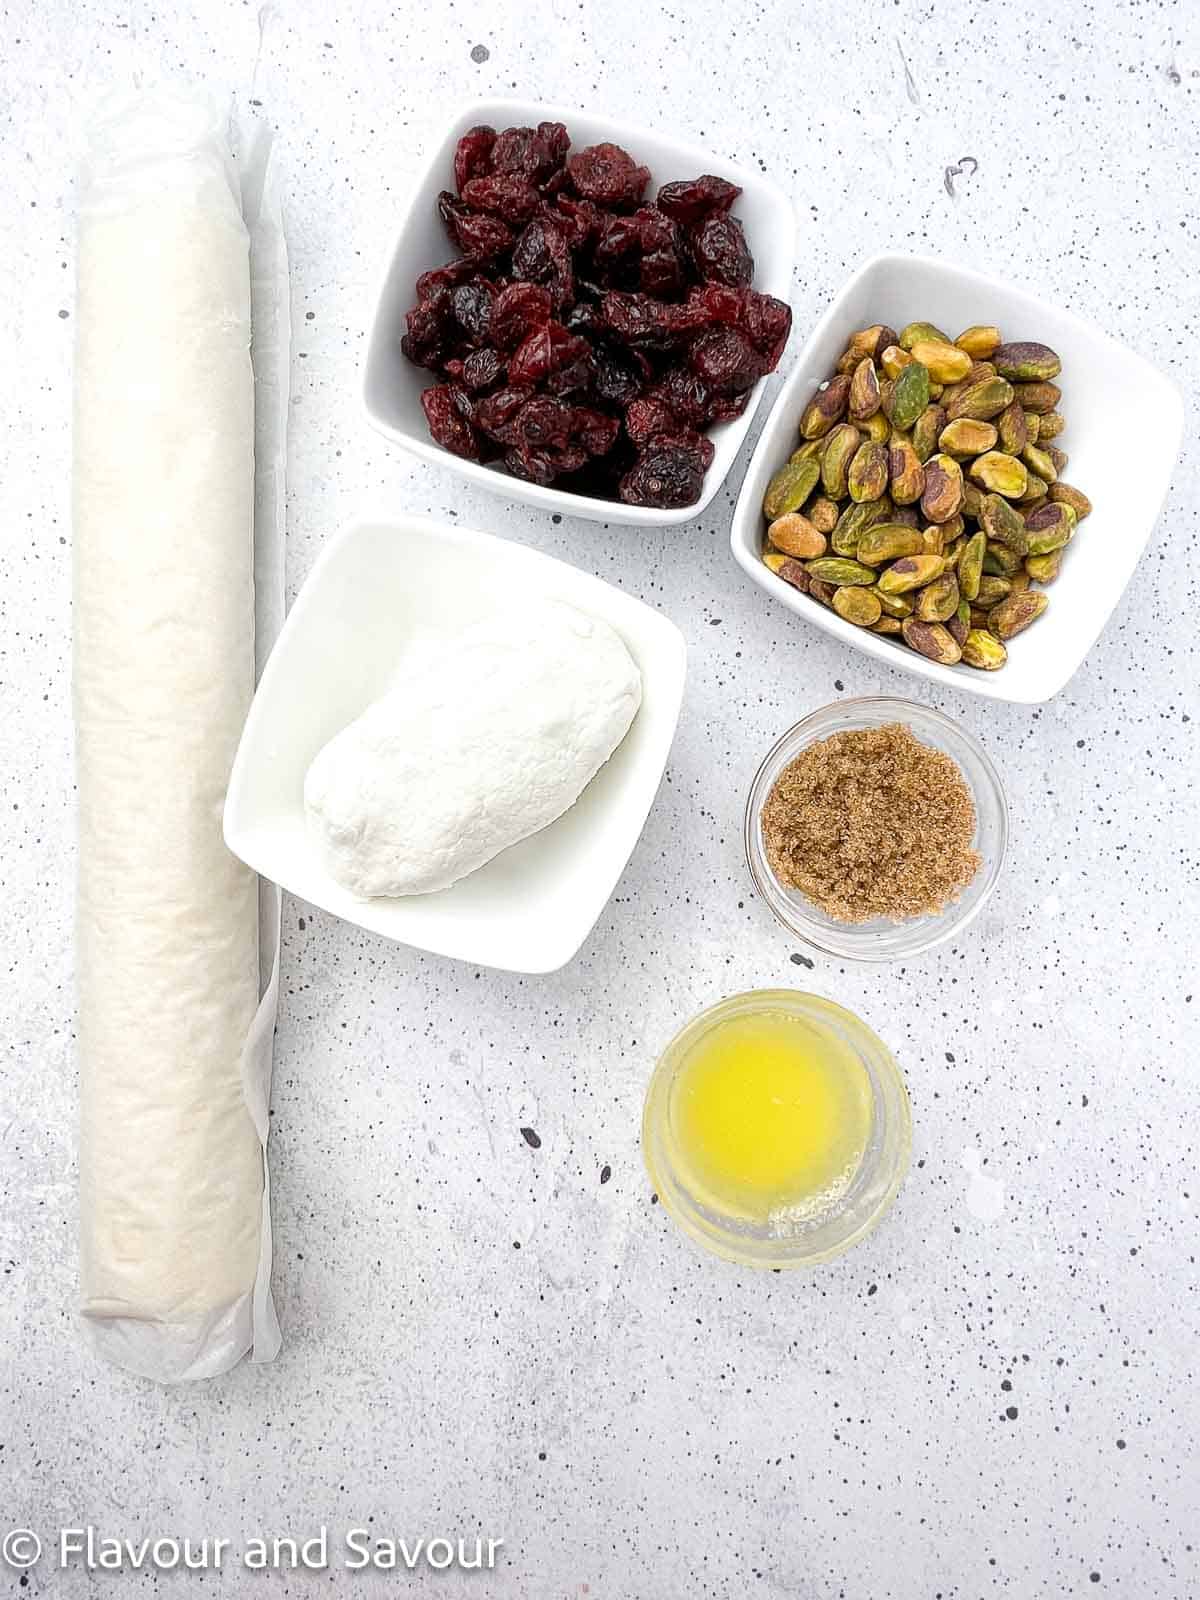 Ingredients for puff pastry cranberry pistachio pinwheels: puff pastry, dried cranberries, pistachios, goat cheese, brown sugar, and melted butter.